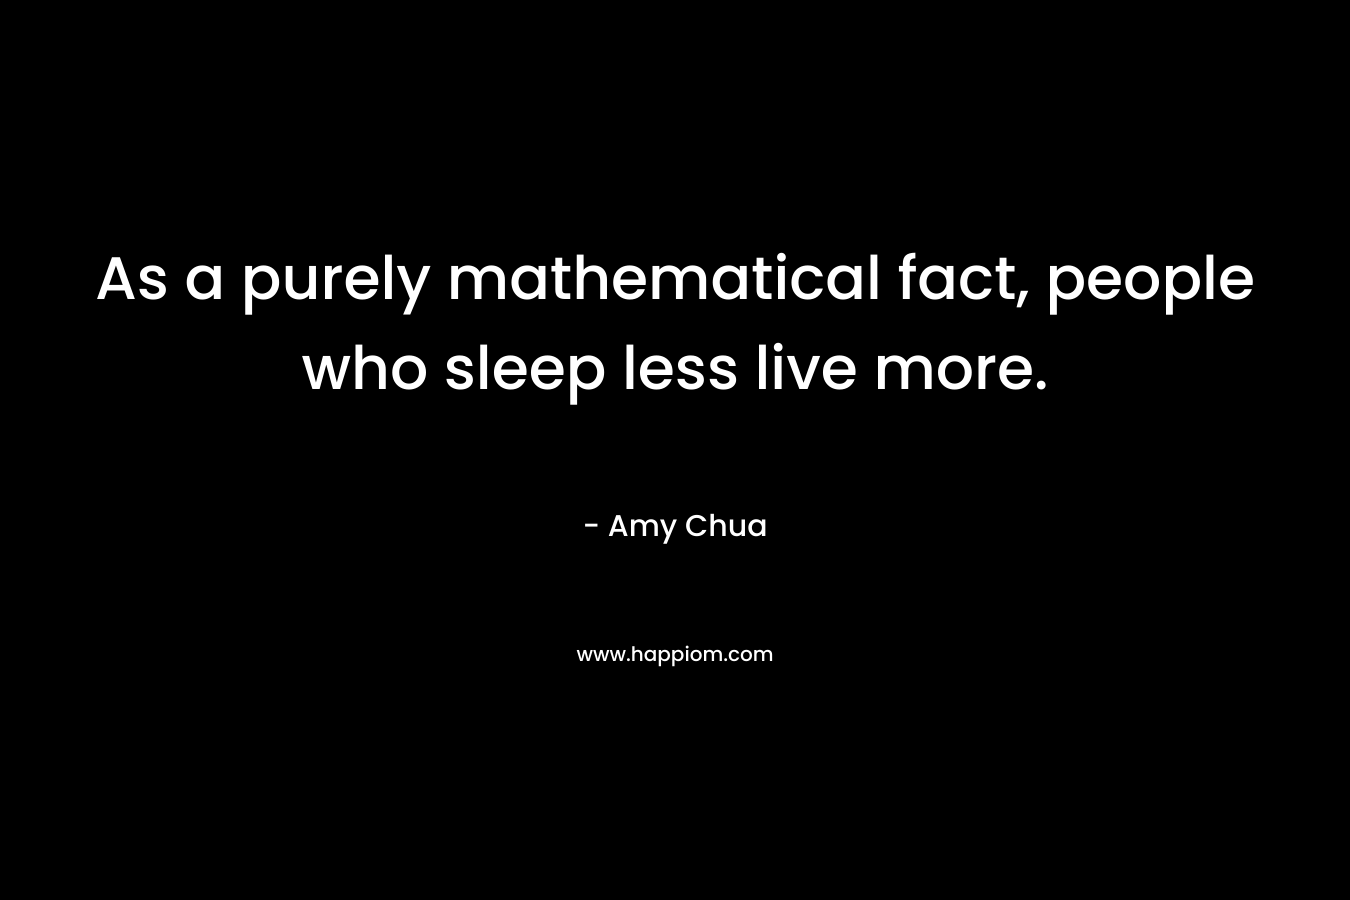 As a purely mathematical fact, people who sleep less live more.